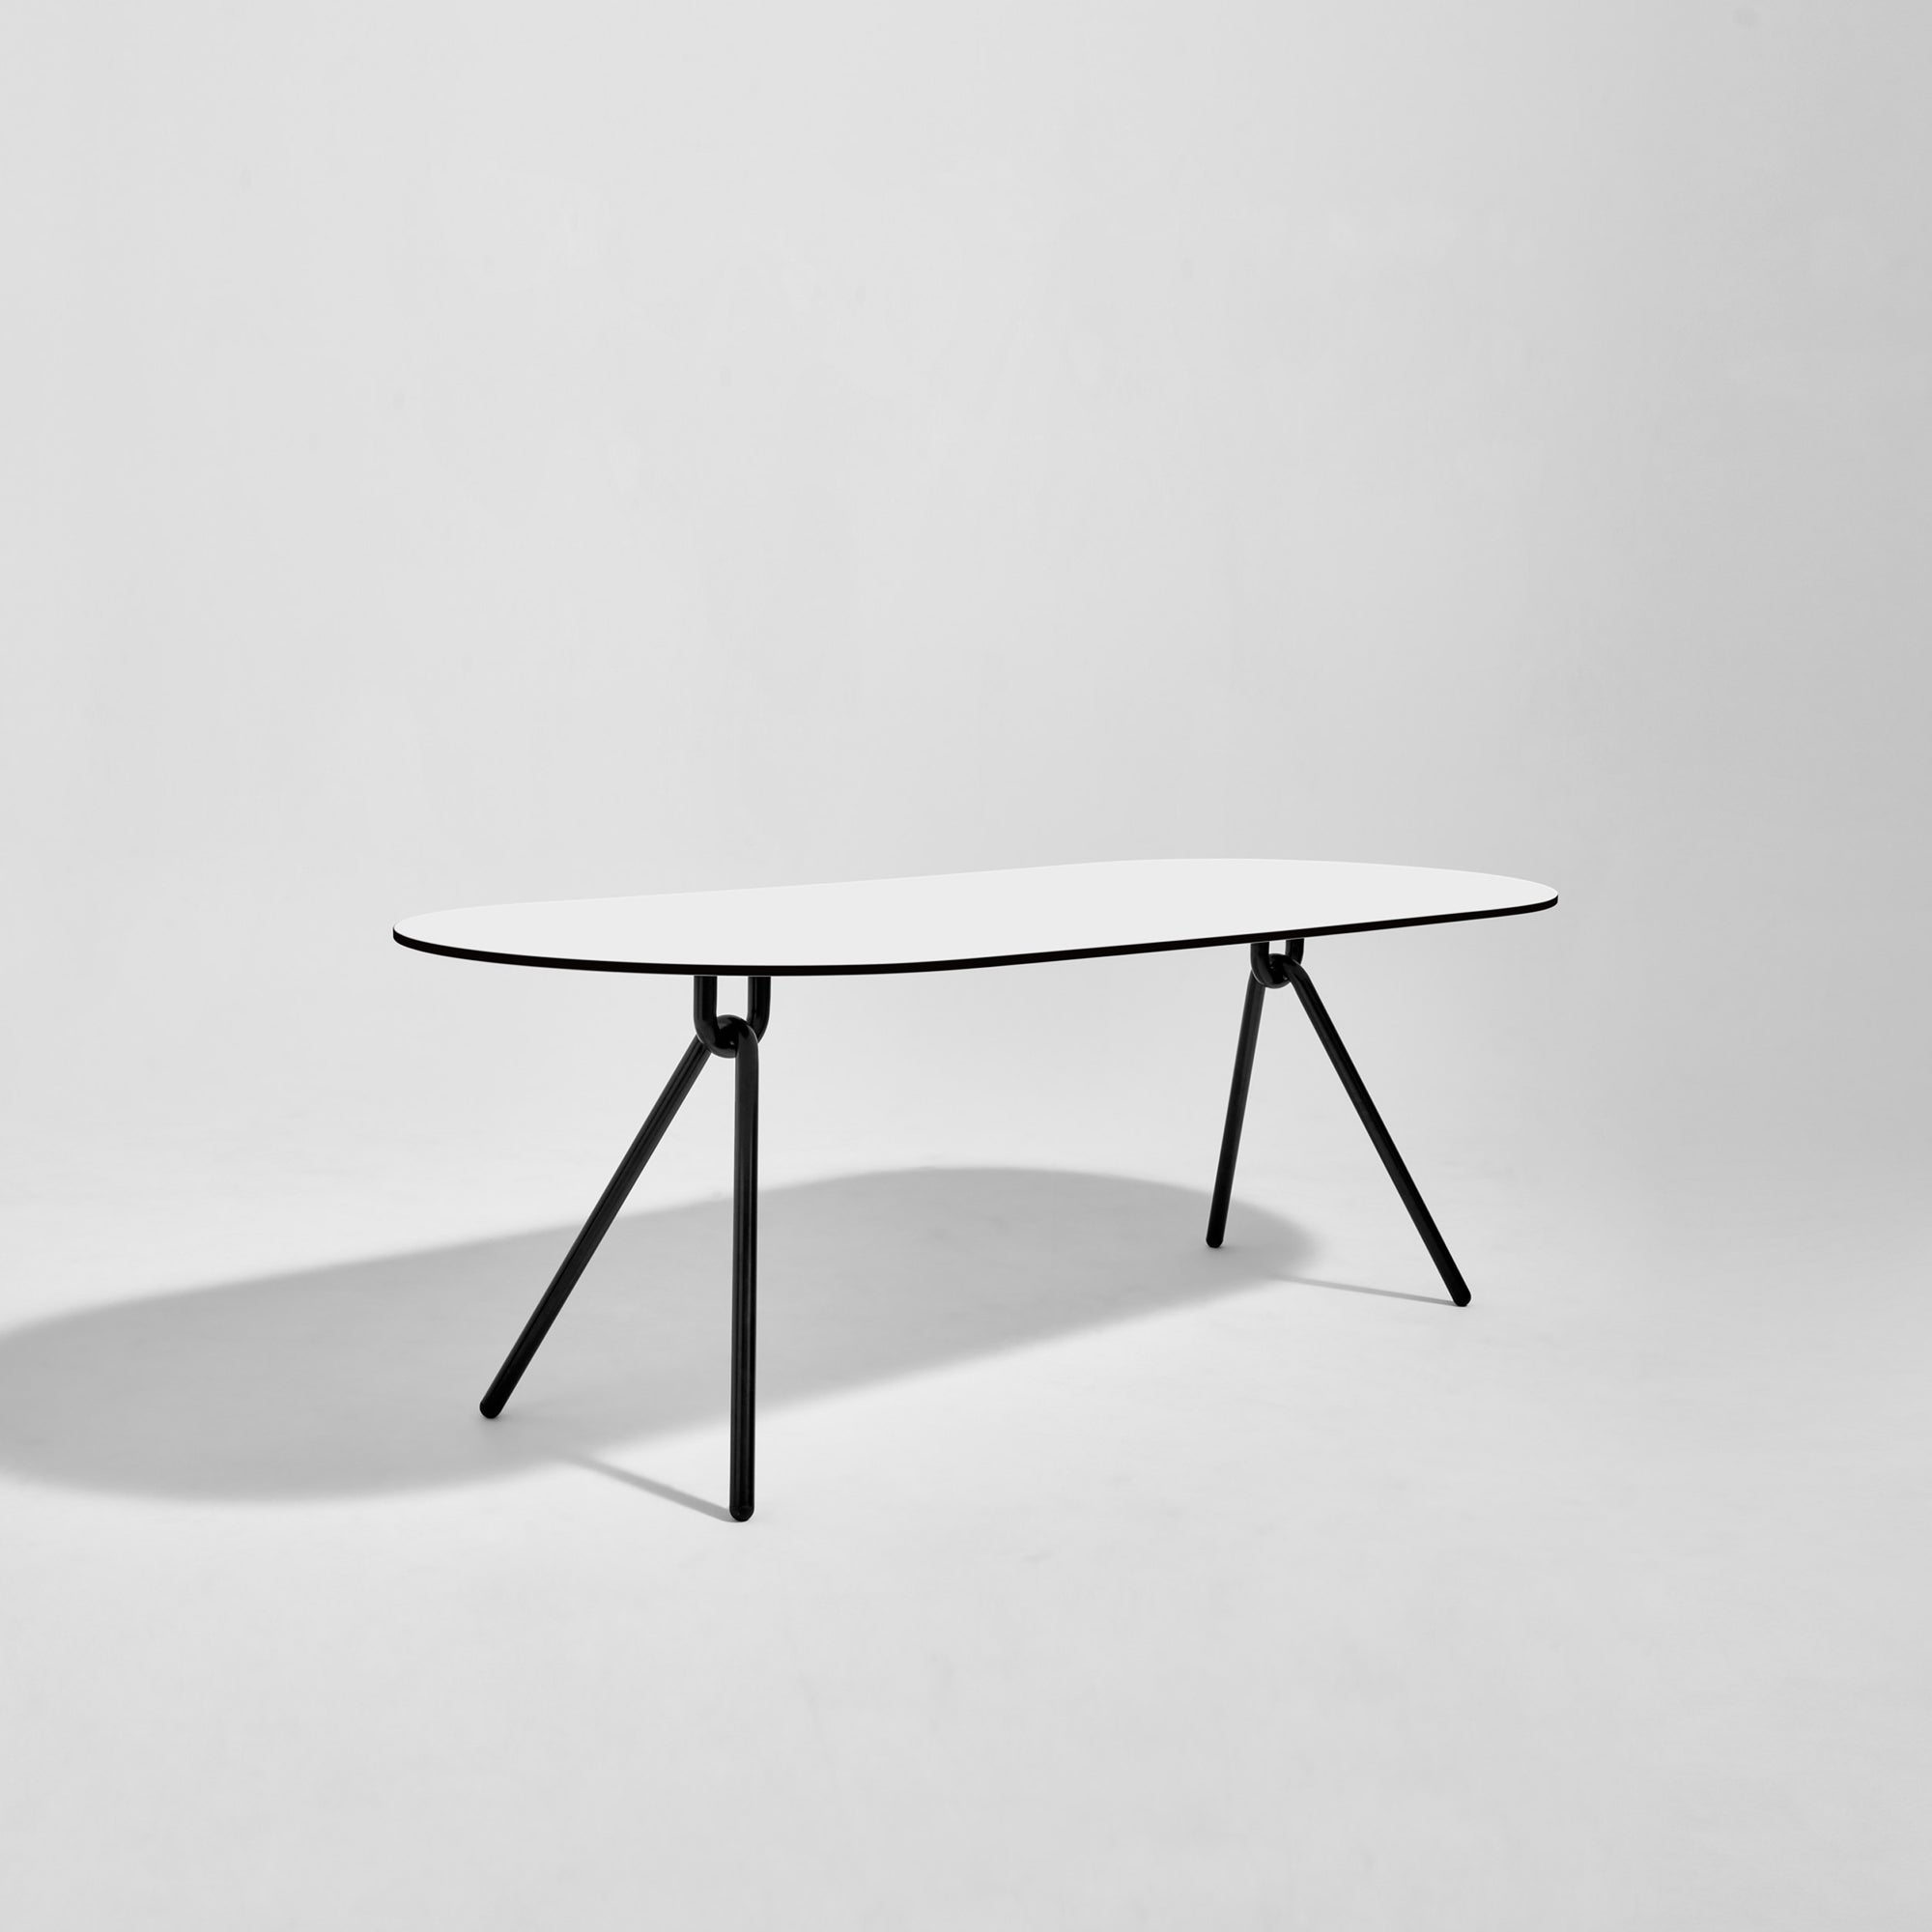 Piper Dining Table - Ellipse | Indoor Outdoor Compact Laminate & Stainless Steel | GibsonKarlo | DesignByThem